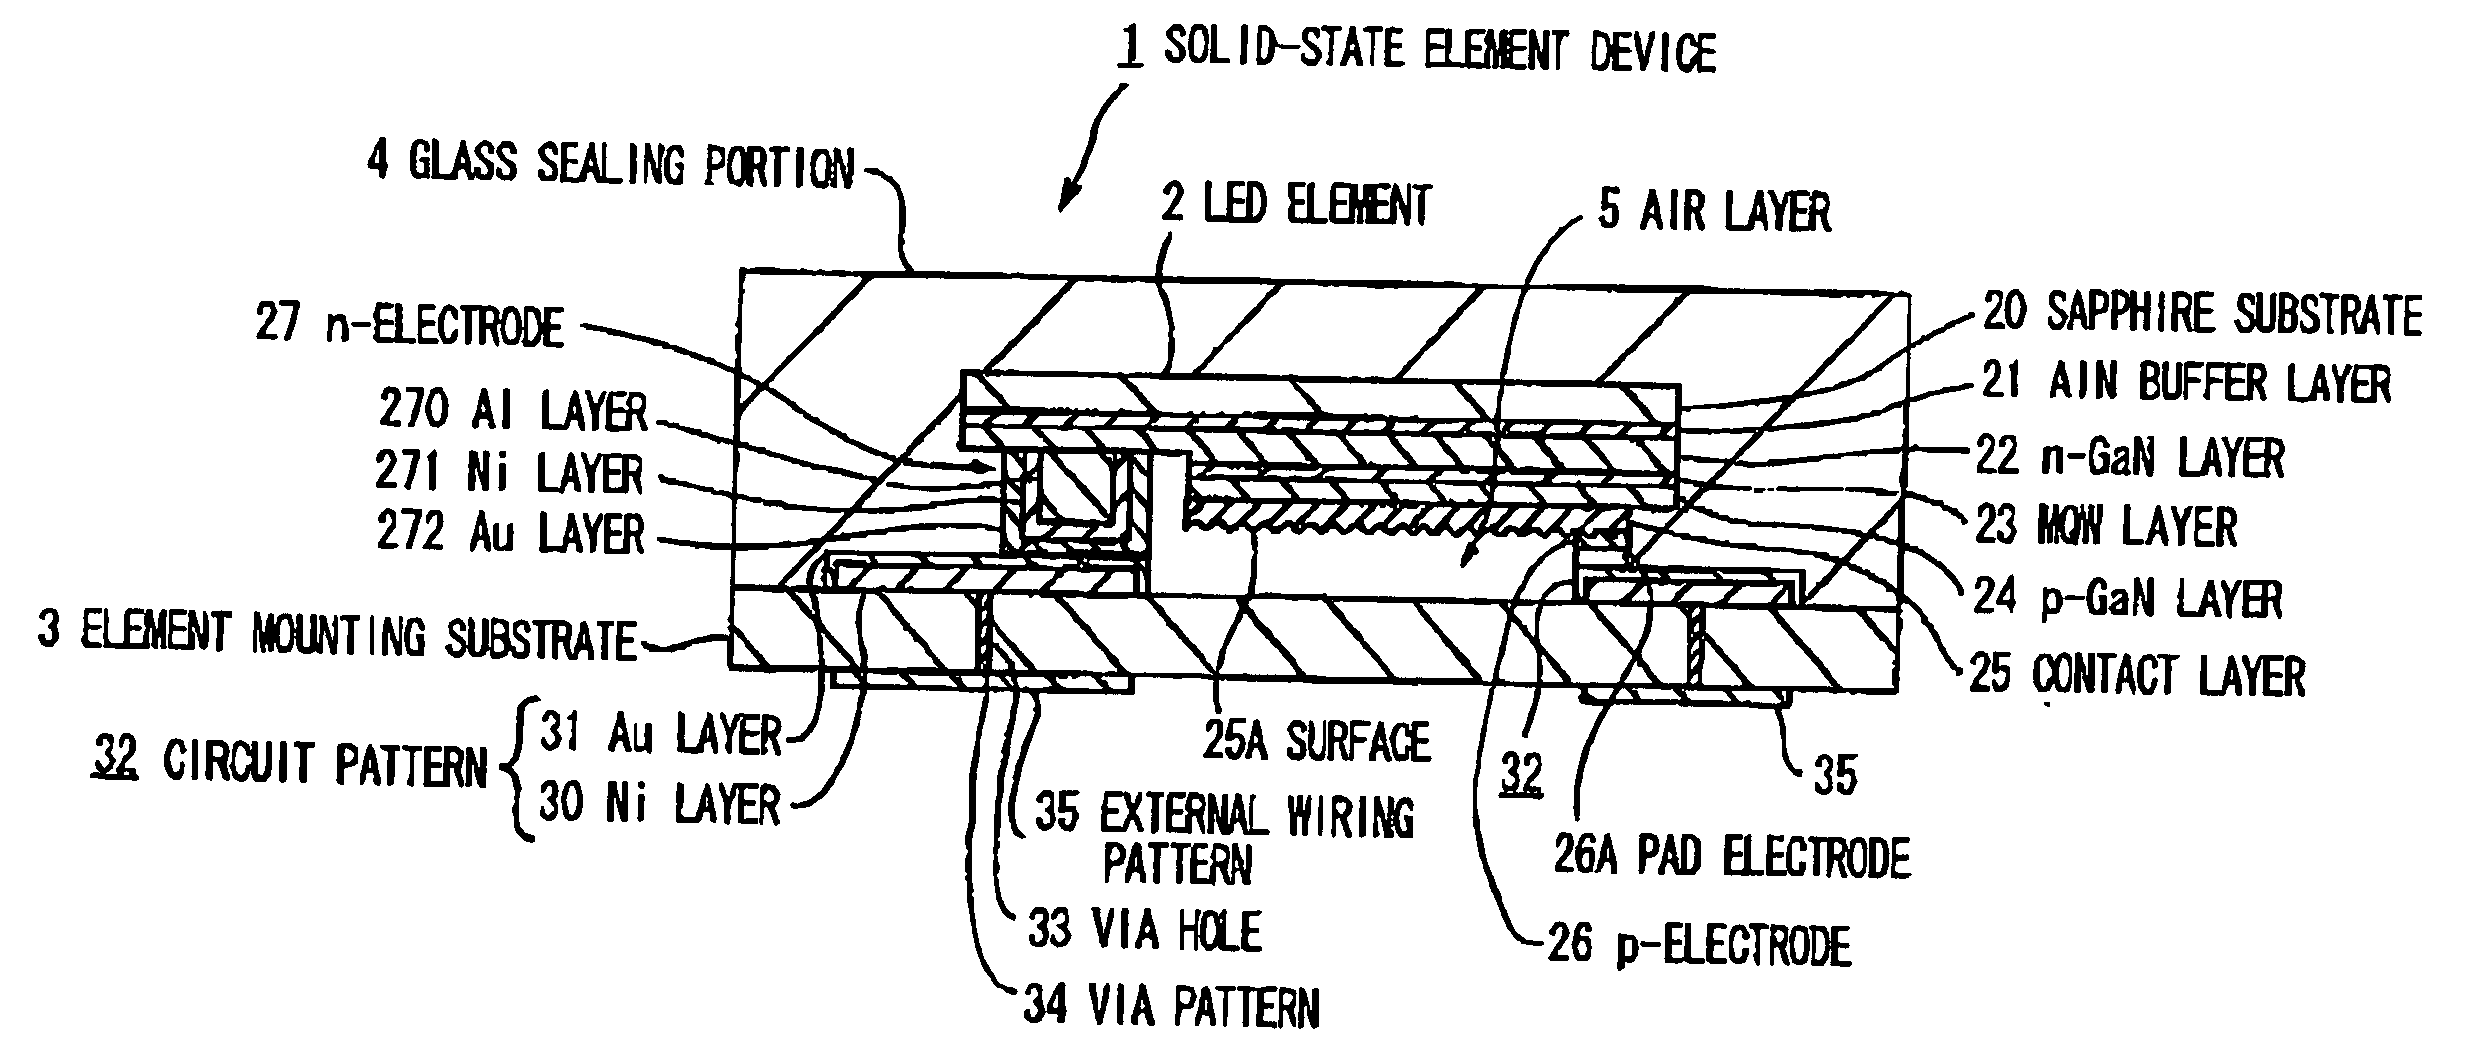 Solid-state element device